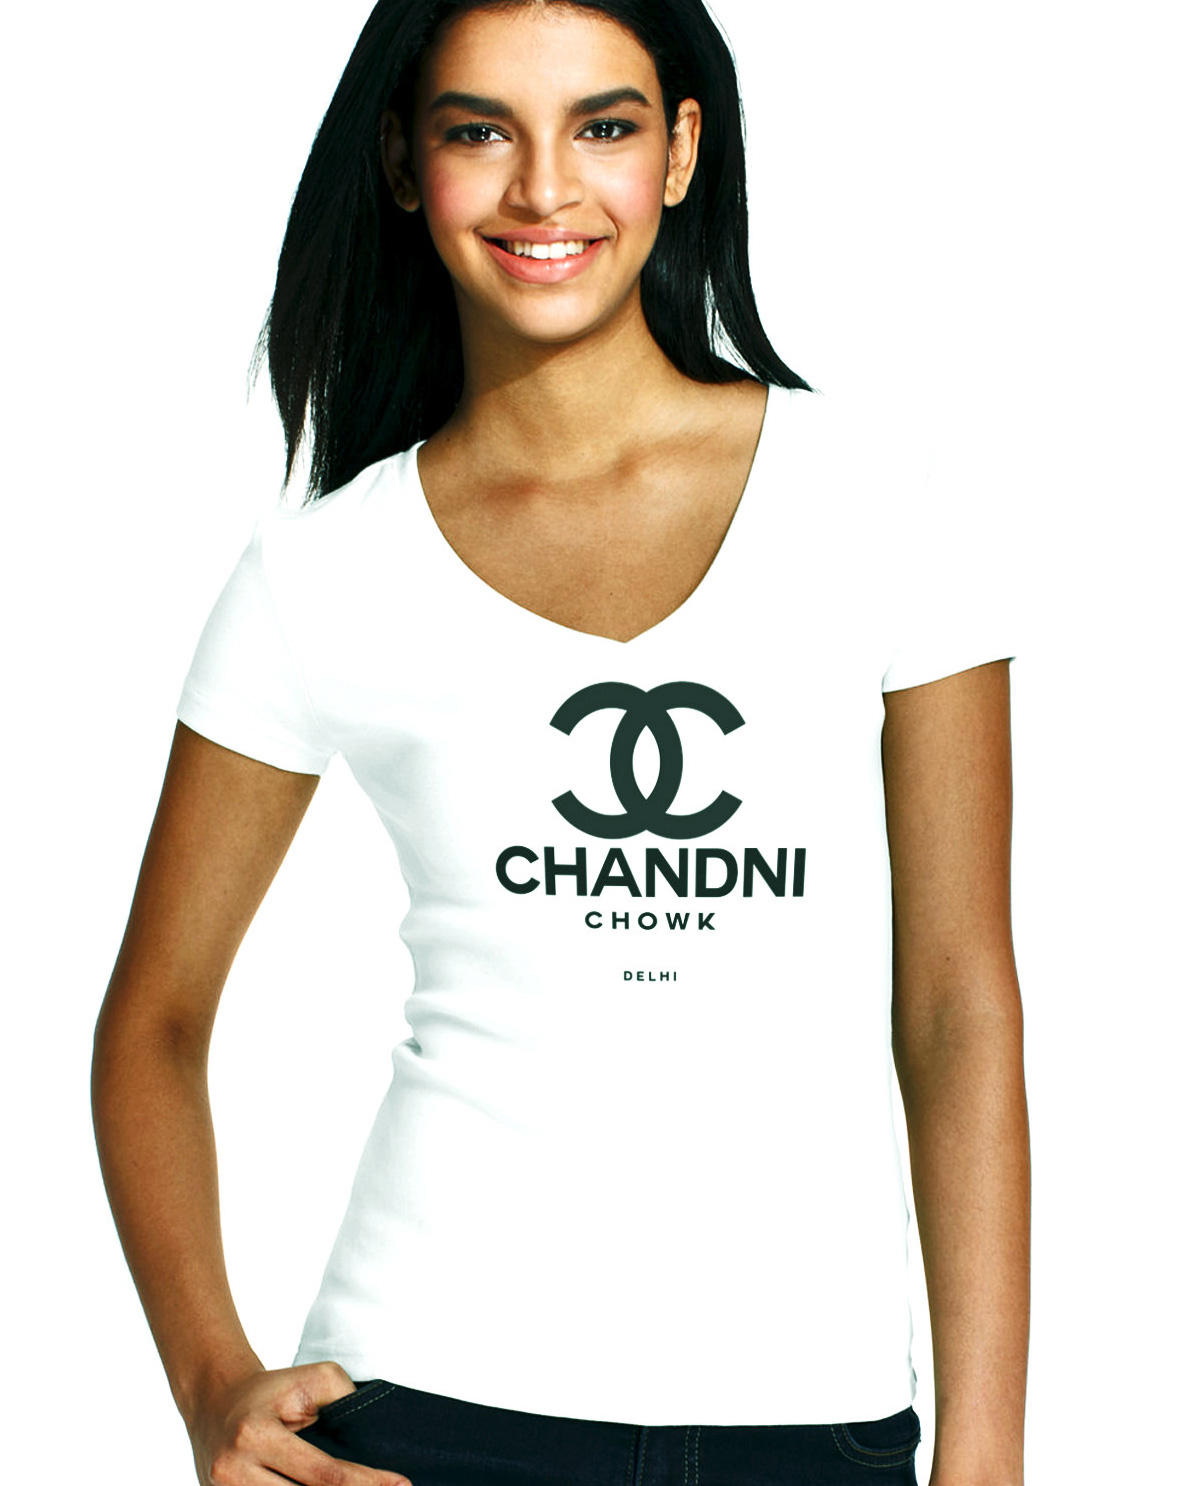 South Asian Female Model white fitted V Neck tshirt with graphic design on front by Brown Man Clothing Co. Chandni Chowk